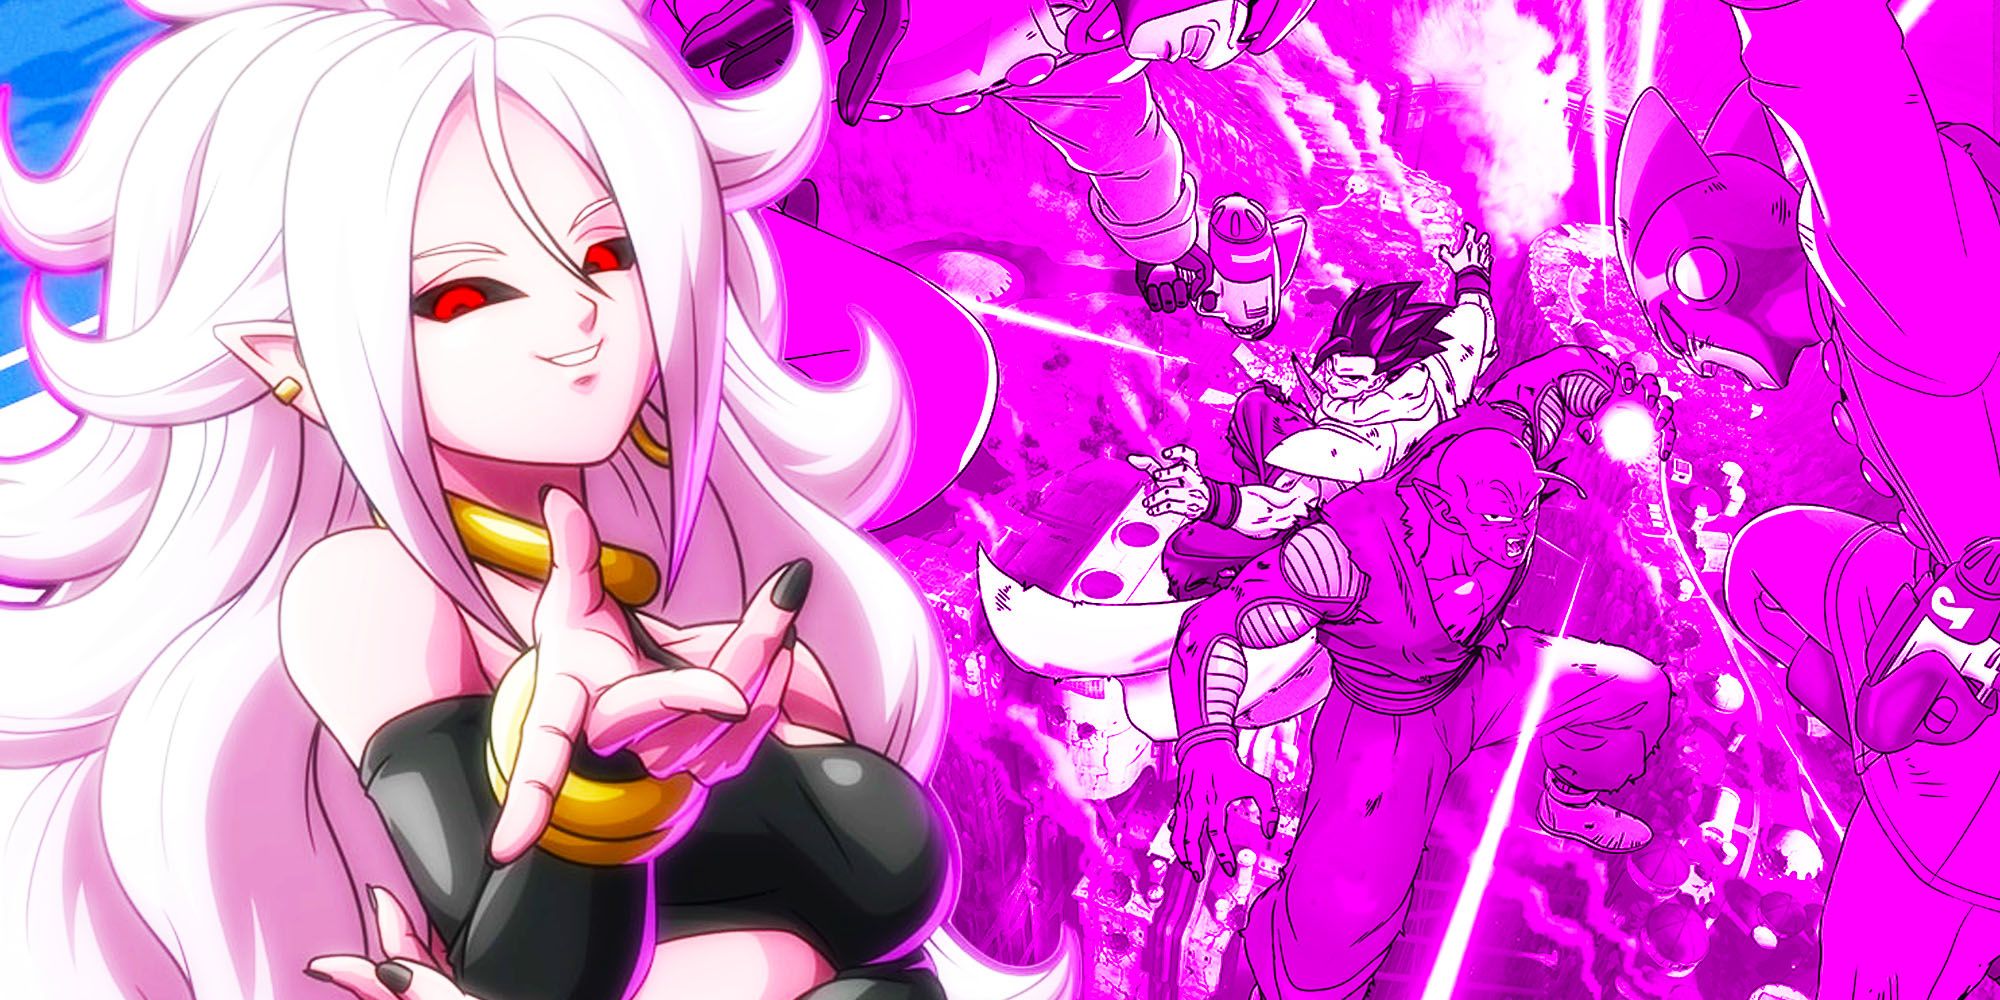 Android 21 Is Officially Dragon Ball Canon Now, So Where Is She?